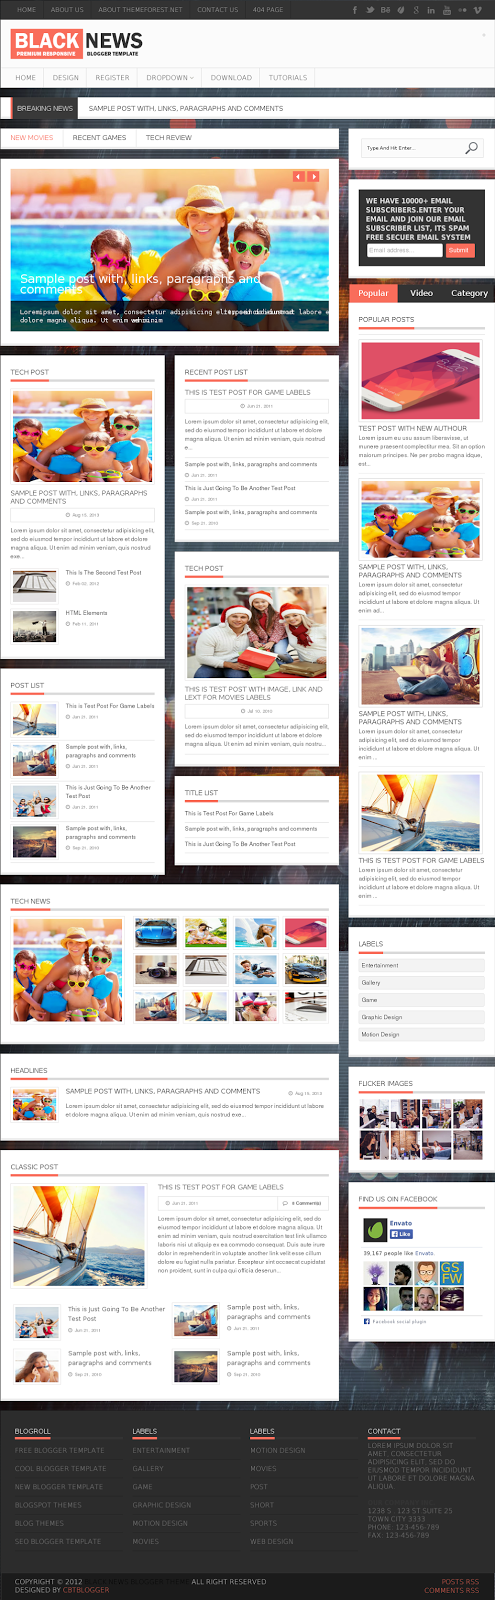 Image Free Blacknews Responsive Blogger Template Features